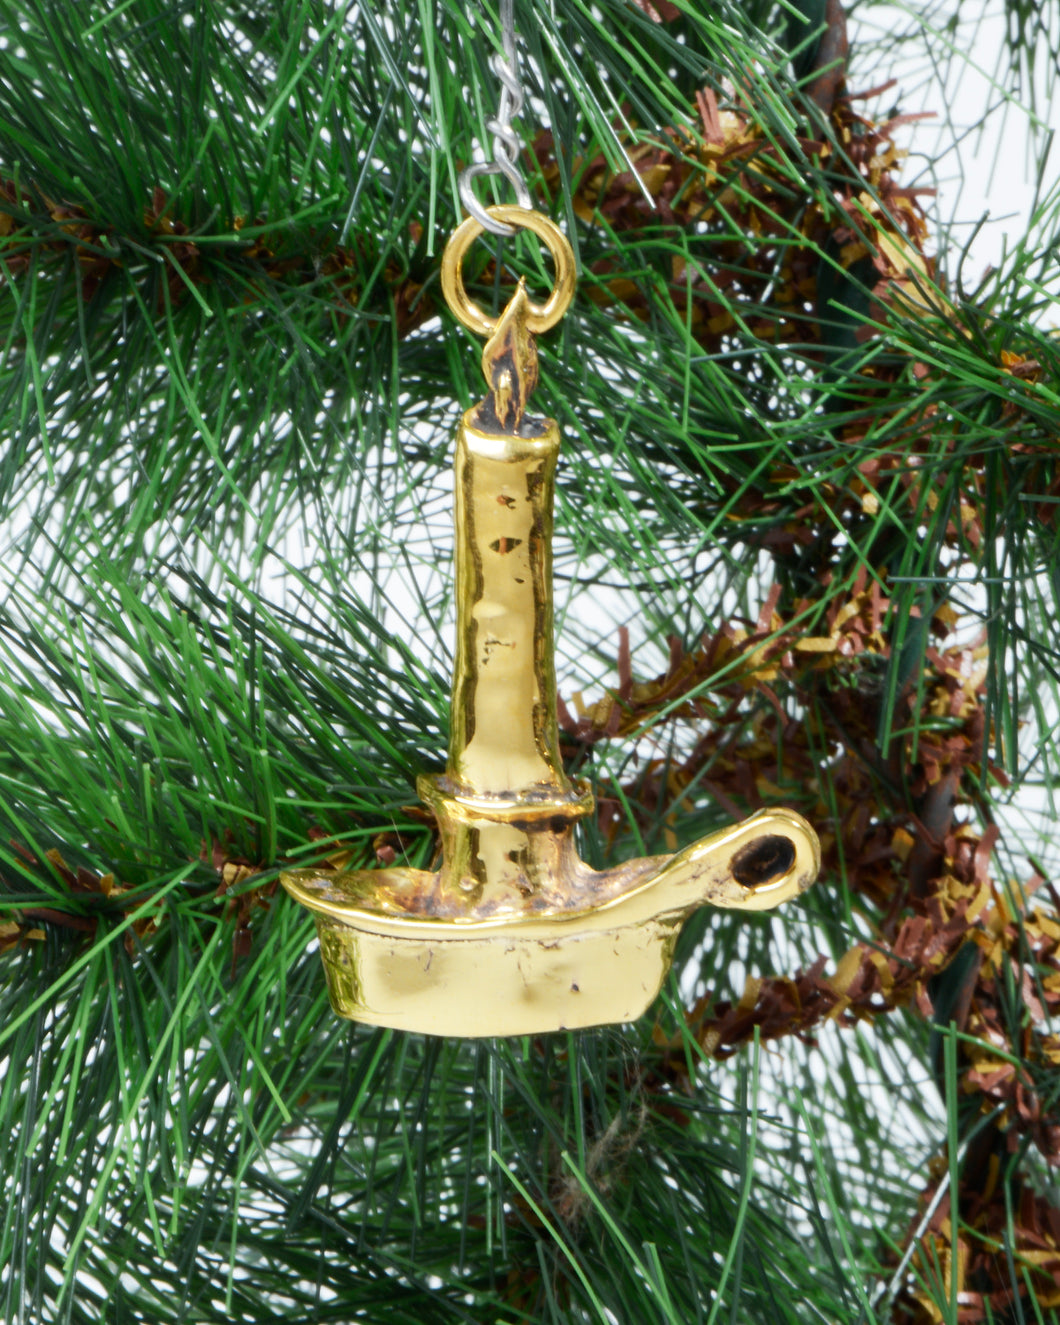 2022 Candlestick Holiday collectible ornament